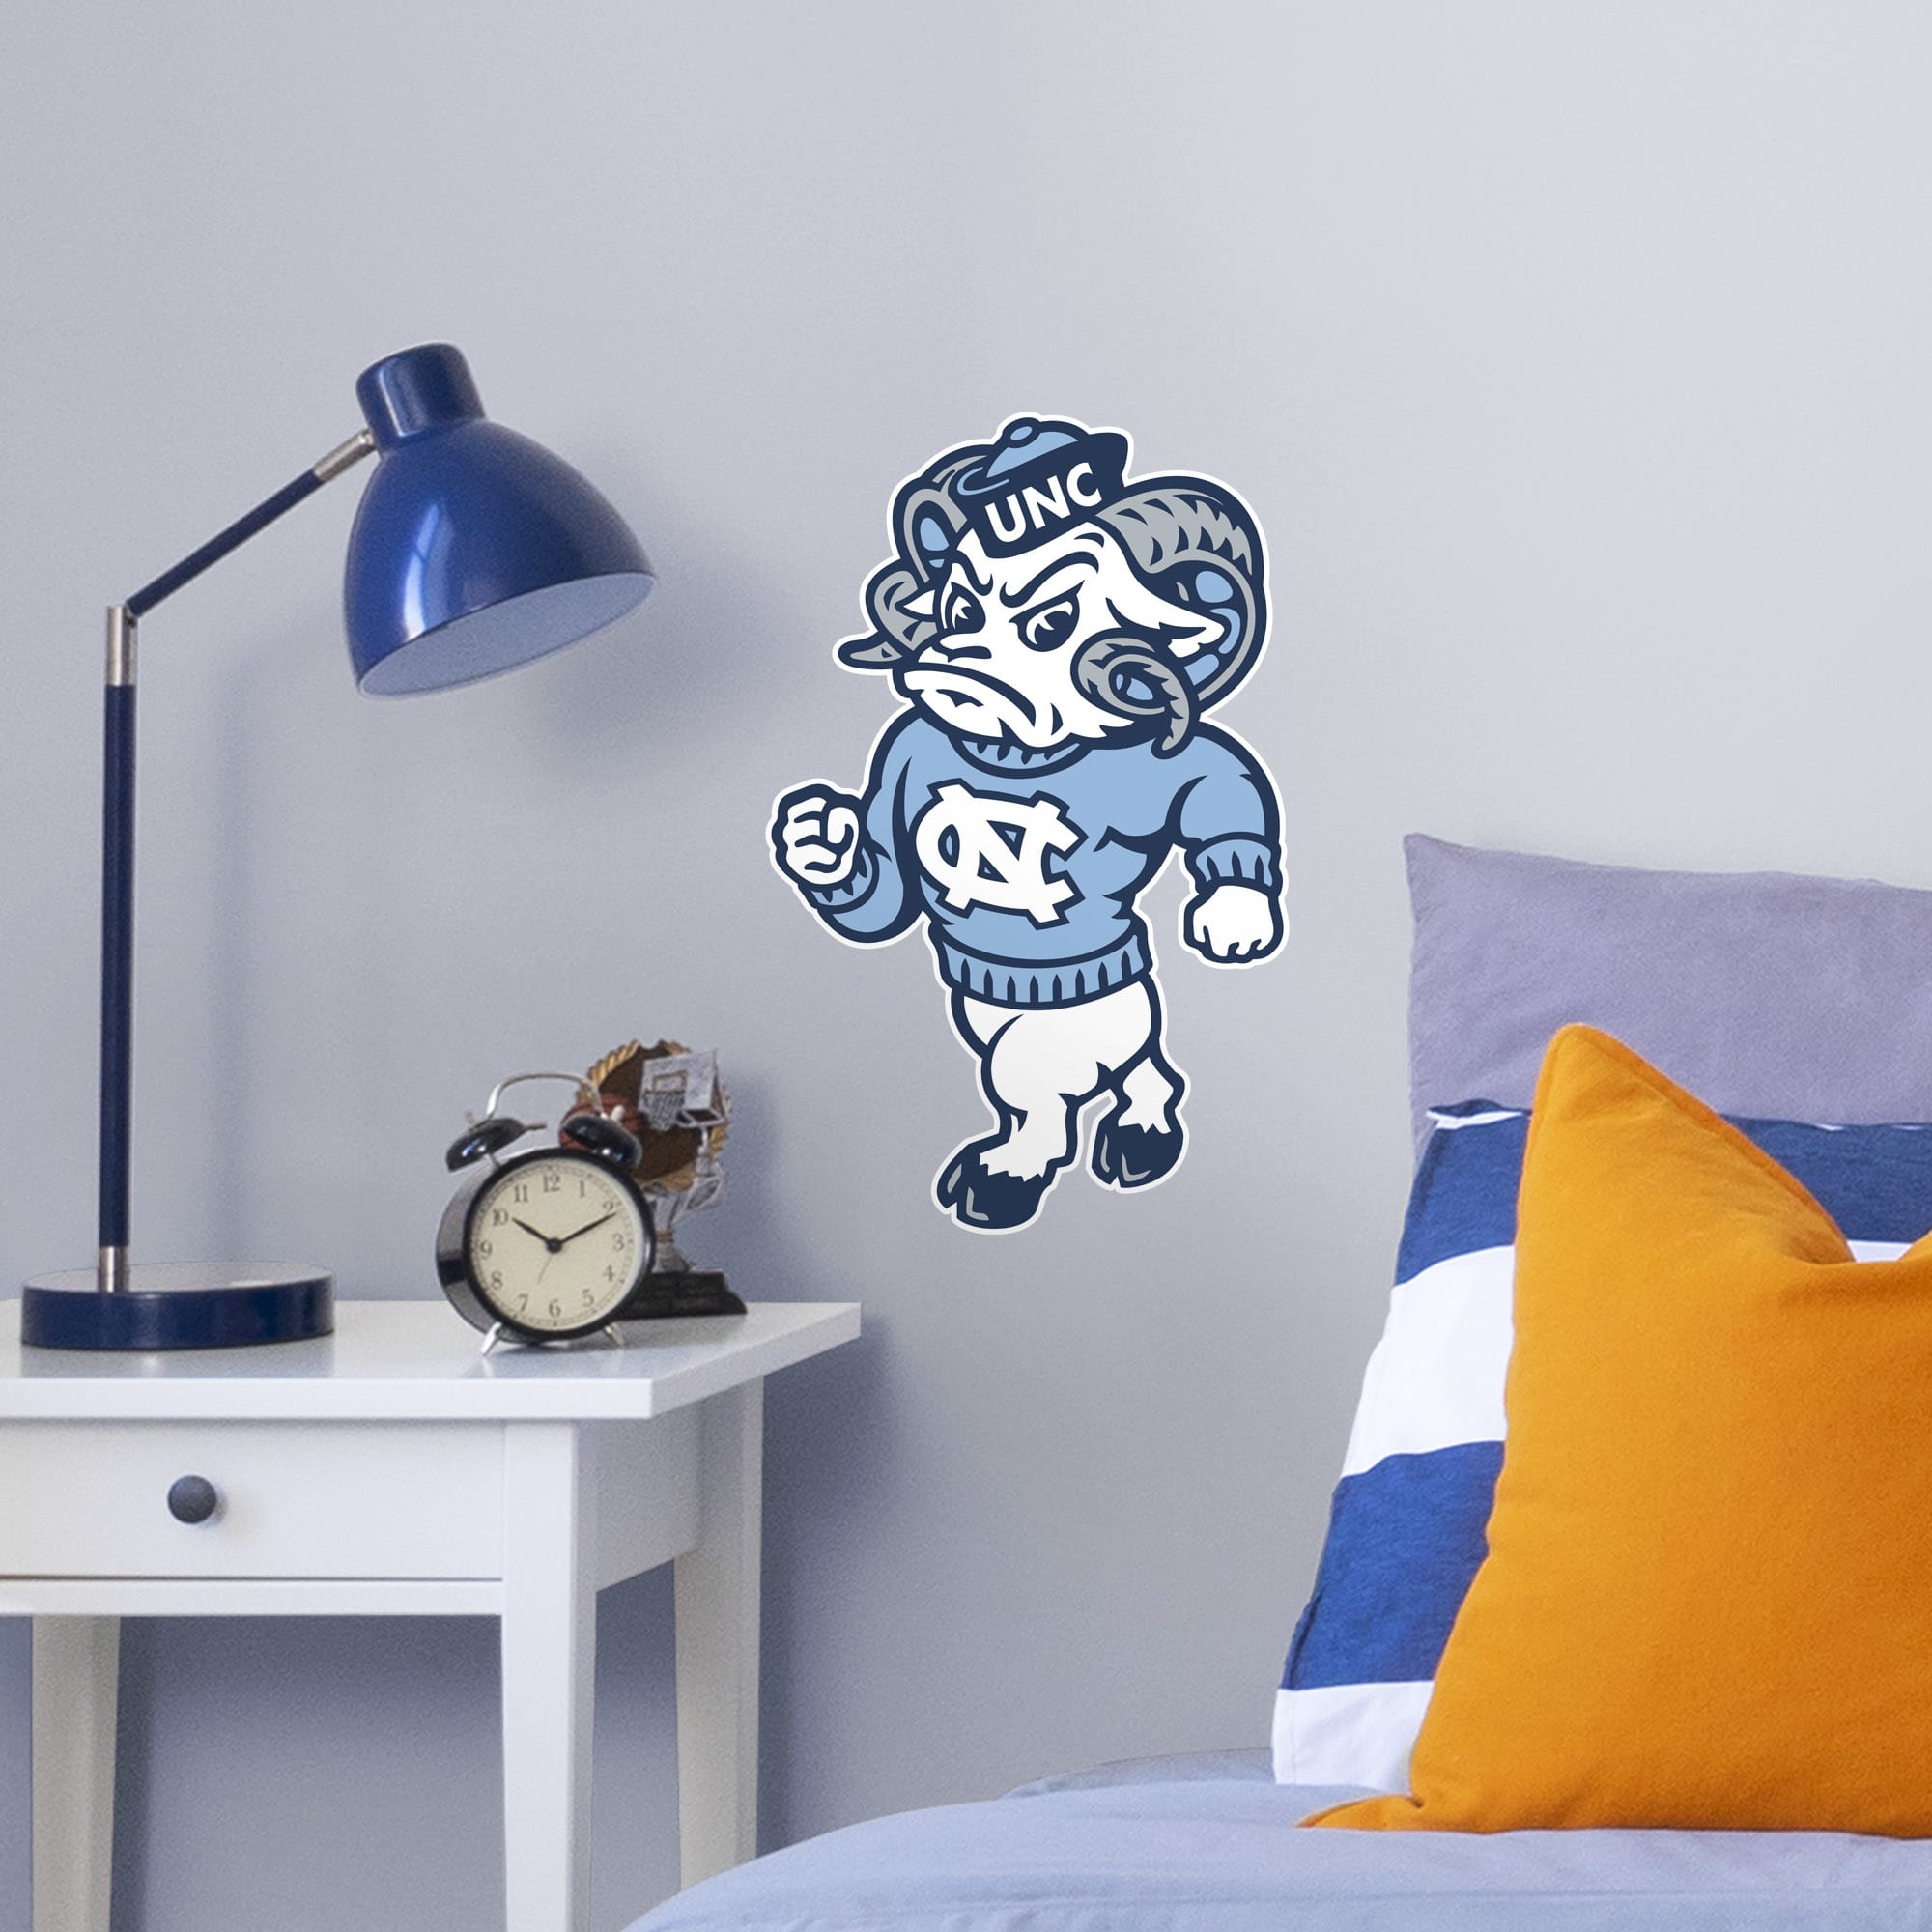 North Carolina Tar Heels: Rameses Mascot - Officially Licensed Removable Wall Decal Large by Fathead | Vinyl